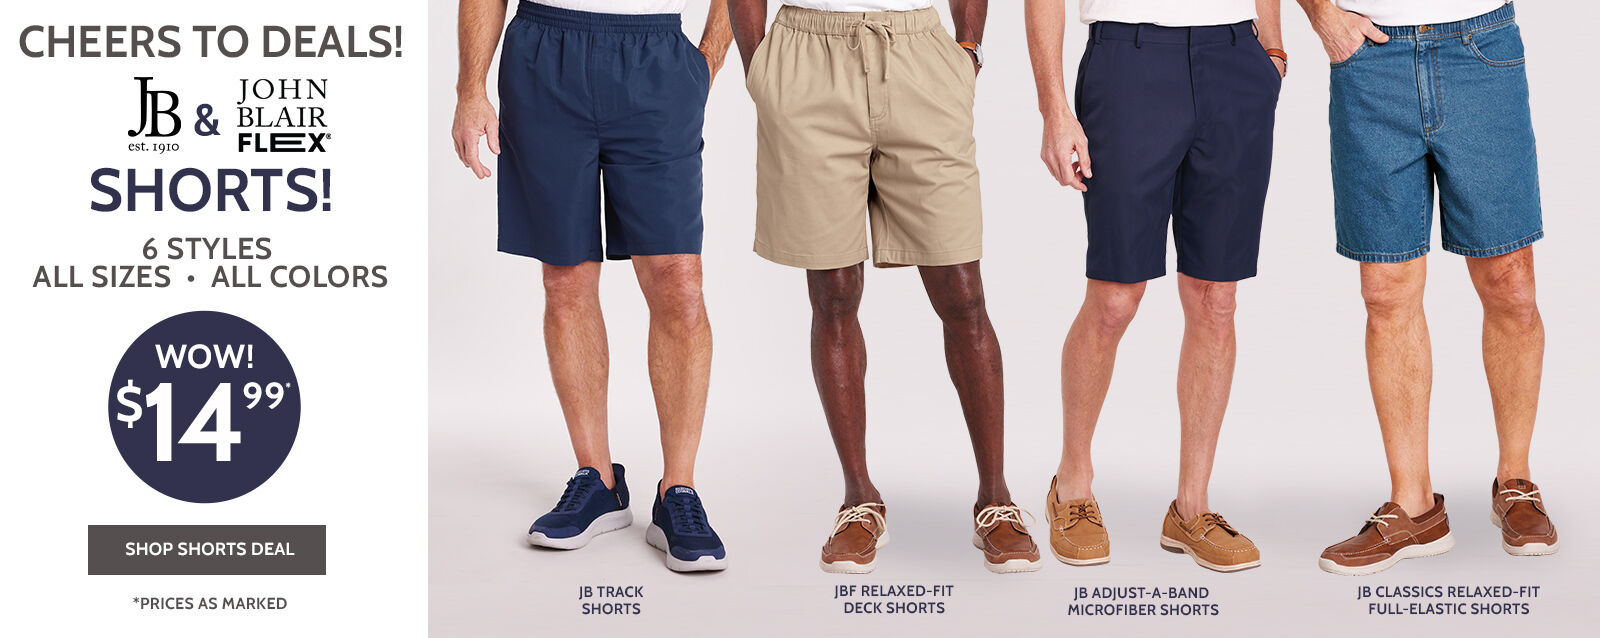 cheers to deals! jb est. 1910 & johnblairflex shorts! 6 styles all sizes. all colors wow! $14.99* shop shorts deal *prices as marked